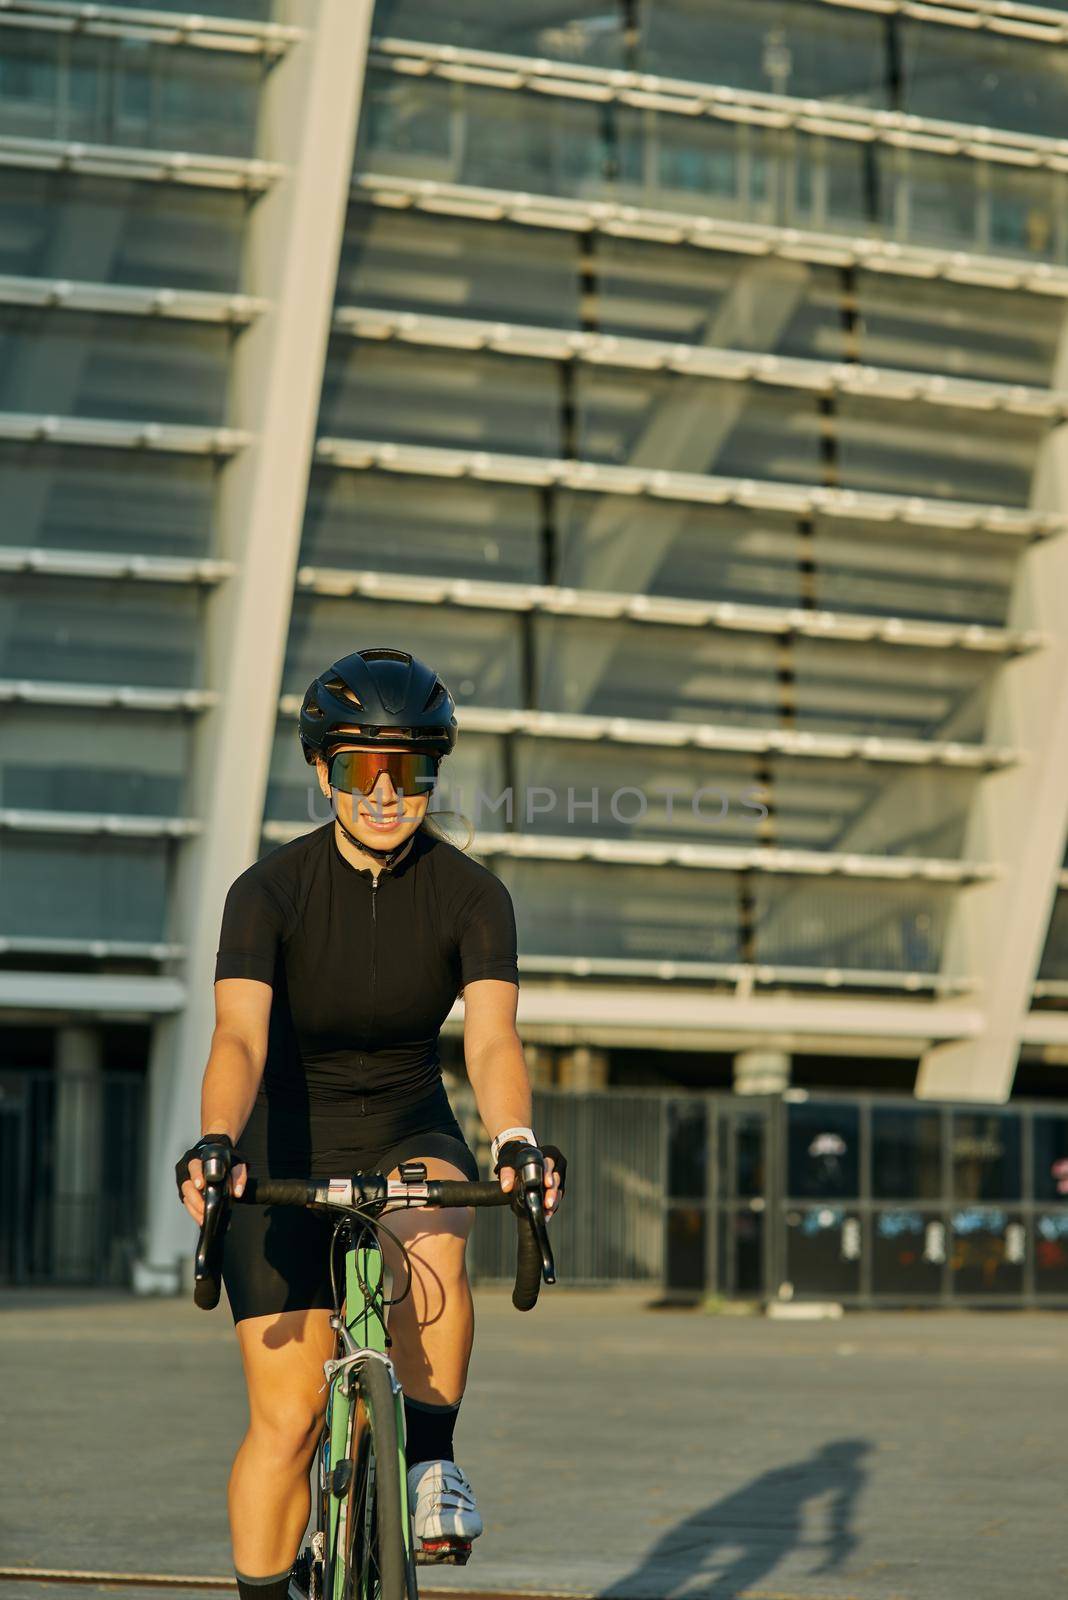 Excited professional female cyclist in black cycling garment and protective gear smiling while riding bicycle in city, training outdoors at sunset. Urban lifestyle, sports concept